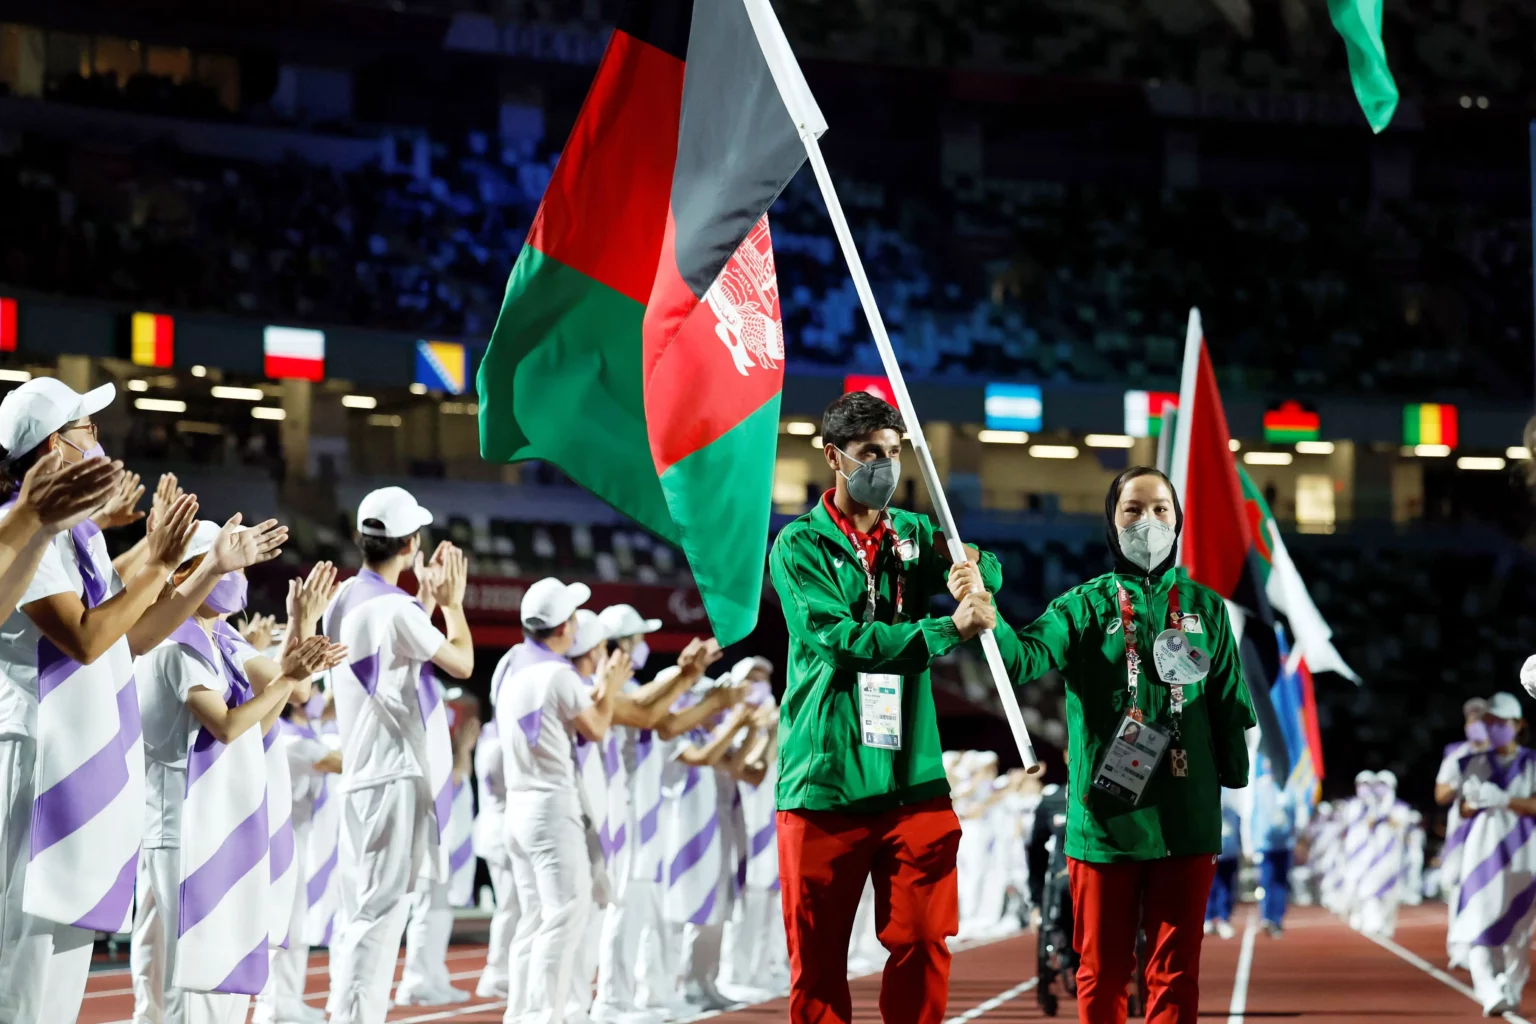 afghanistan-to-send-17-female-athletes-to-compete-in-the-asian-games-in-china